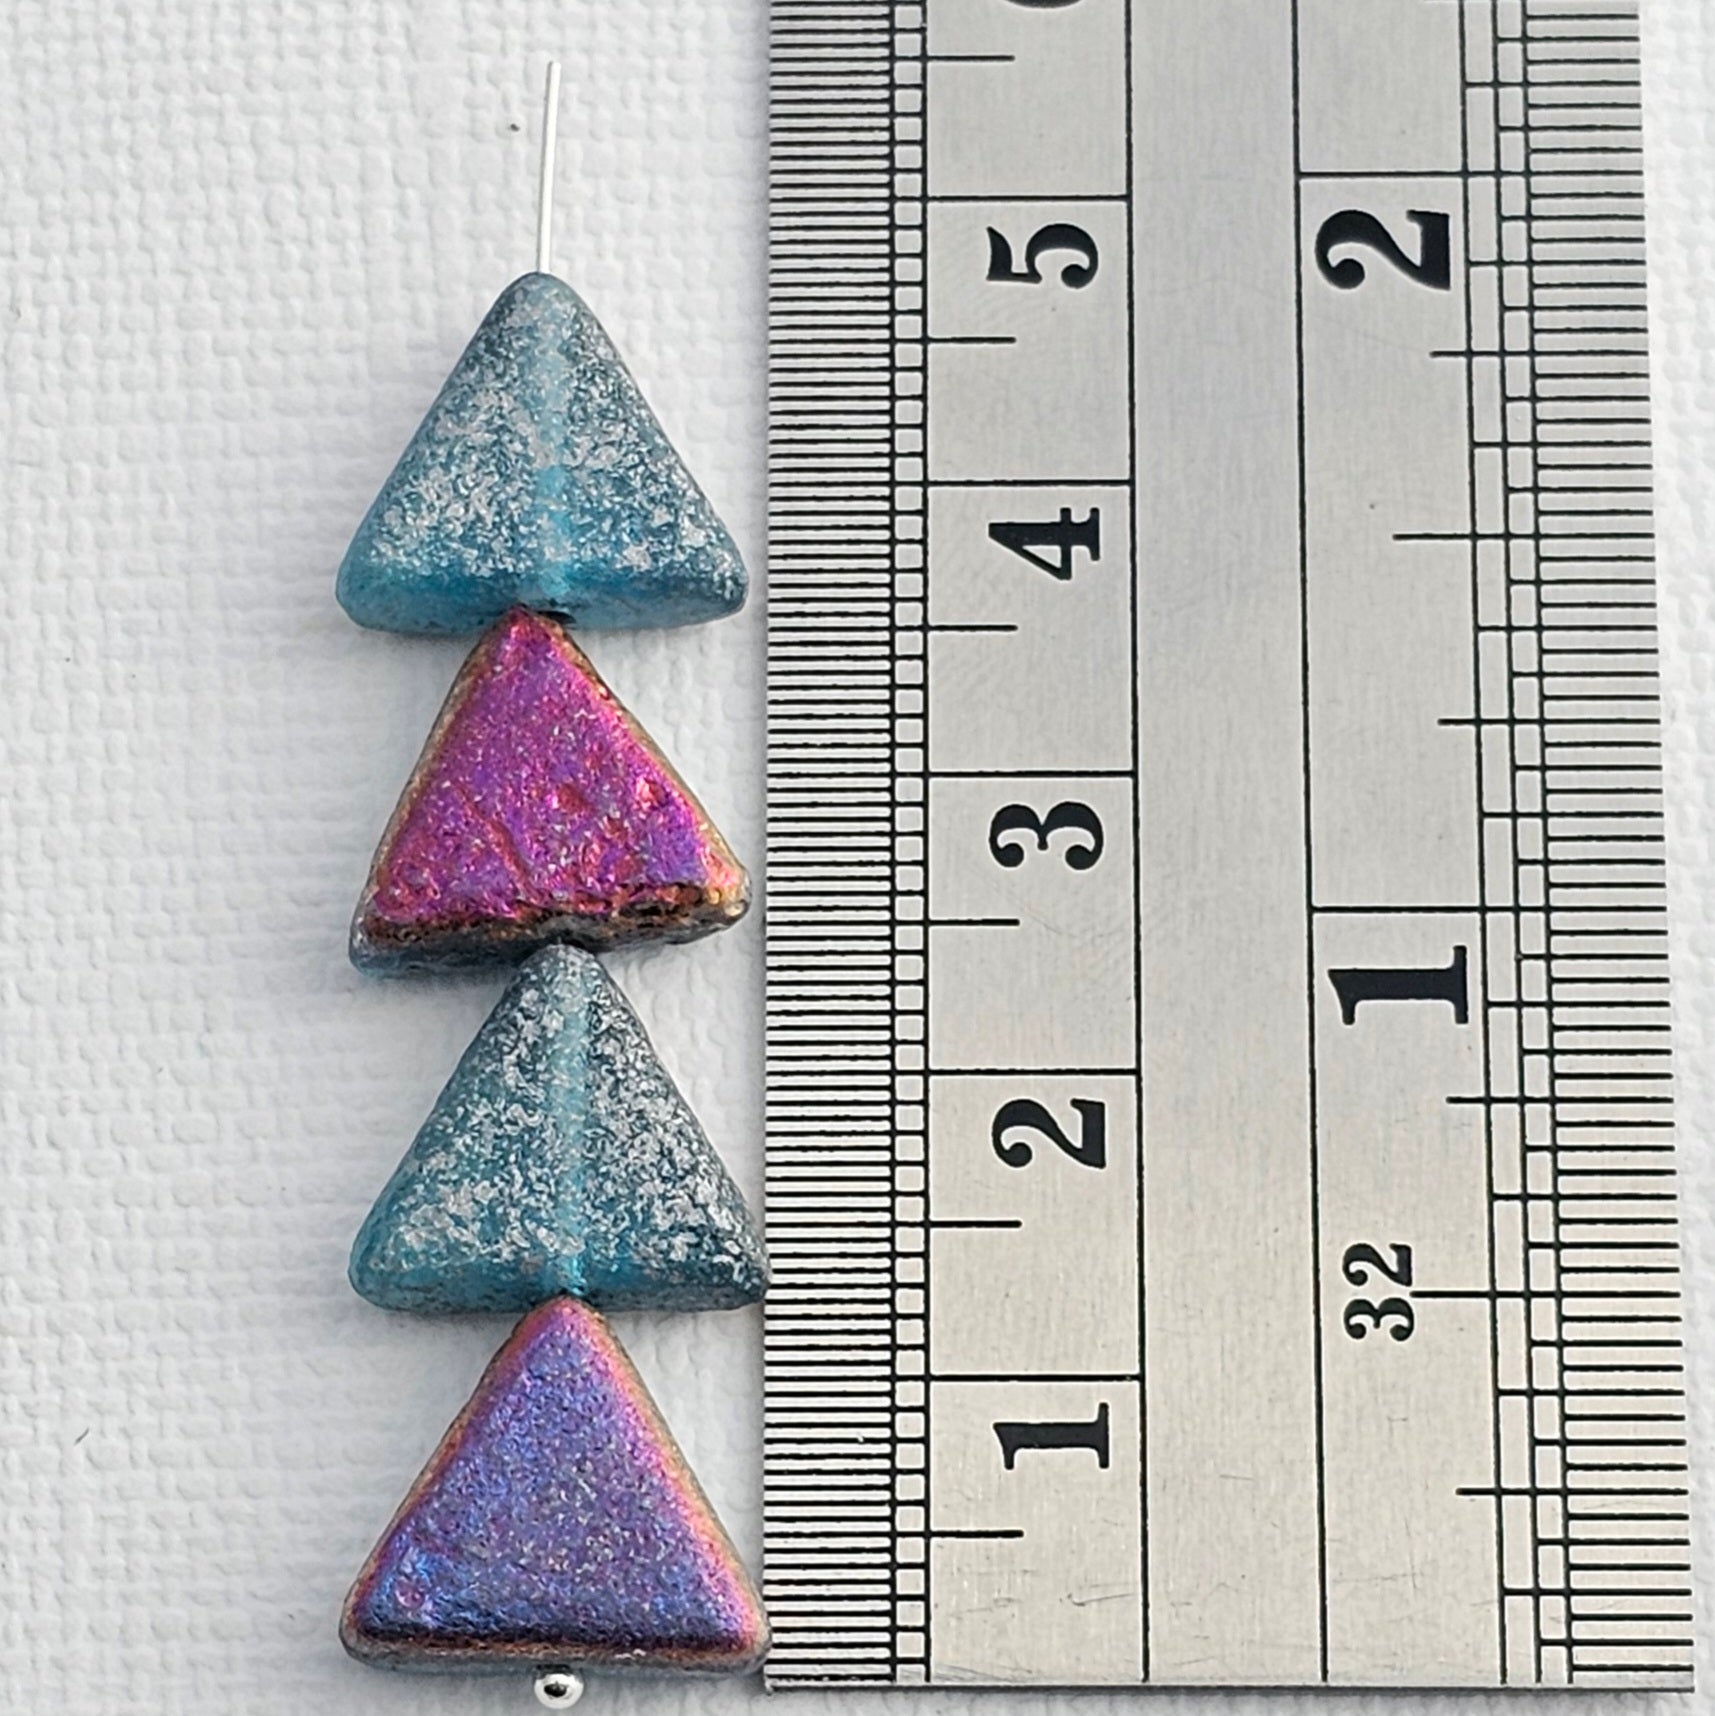 12mm - Aqua/Silver Speckle/Sliperit - Acid Etched Double Coated Triangles